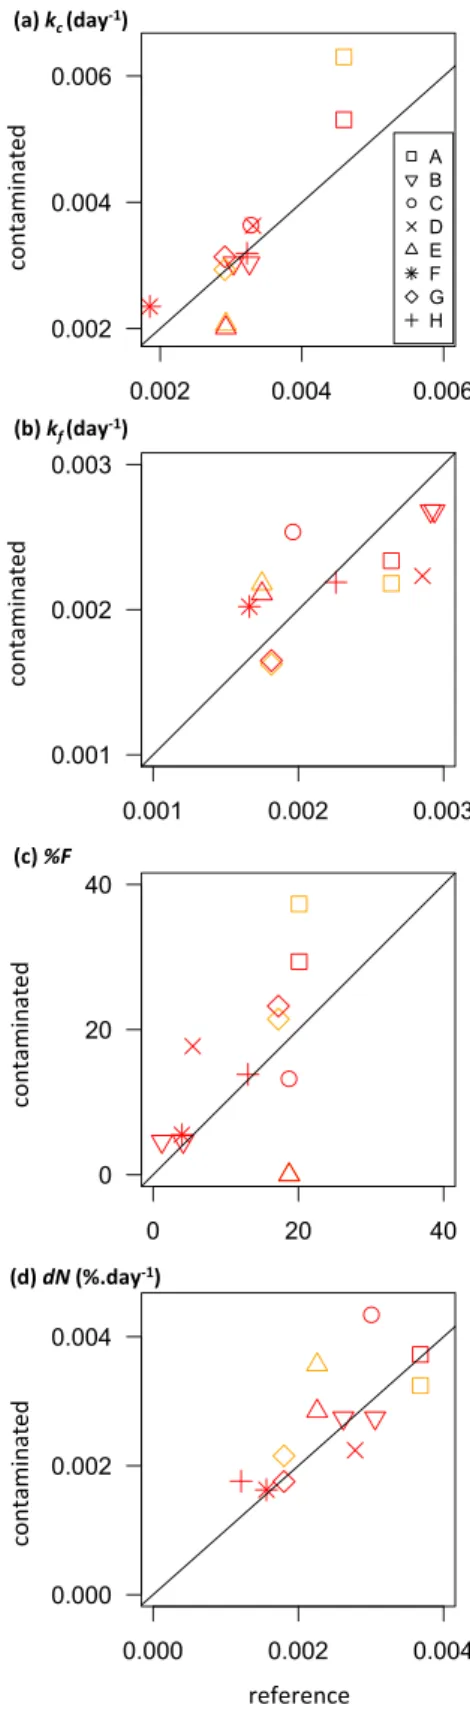 Fig. 3. Leaf litter decay rates in coarse (a) and fine (b) mesh bags, and detri-